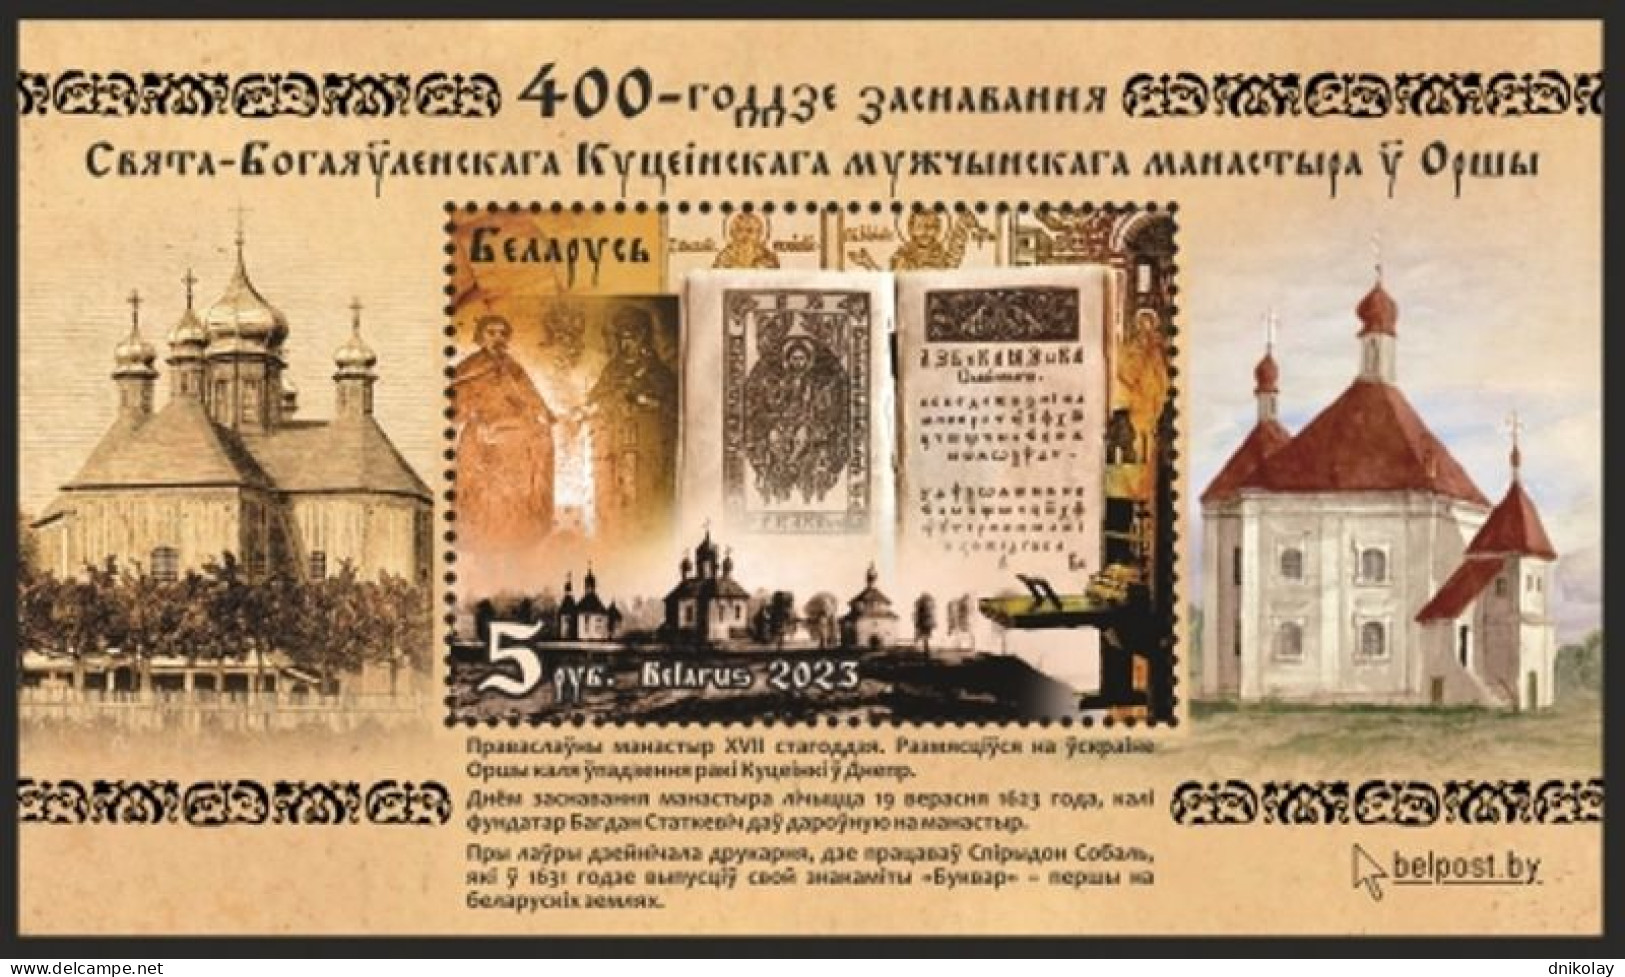 2023 1528 Belarus The 400th Anniversary Of The Holy Epiphany Kutein Male Monastery - Orsha MNH - Bielorrusia